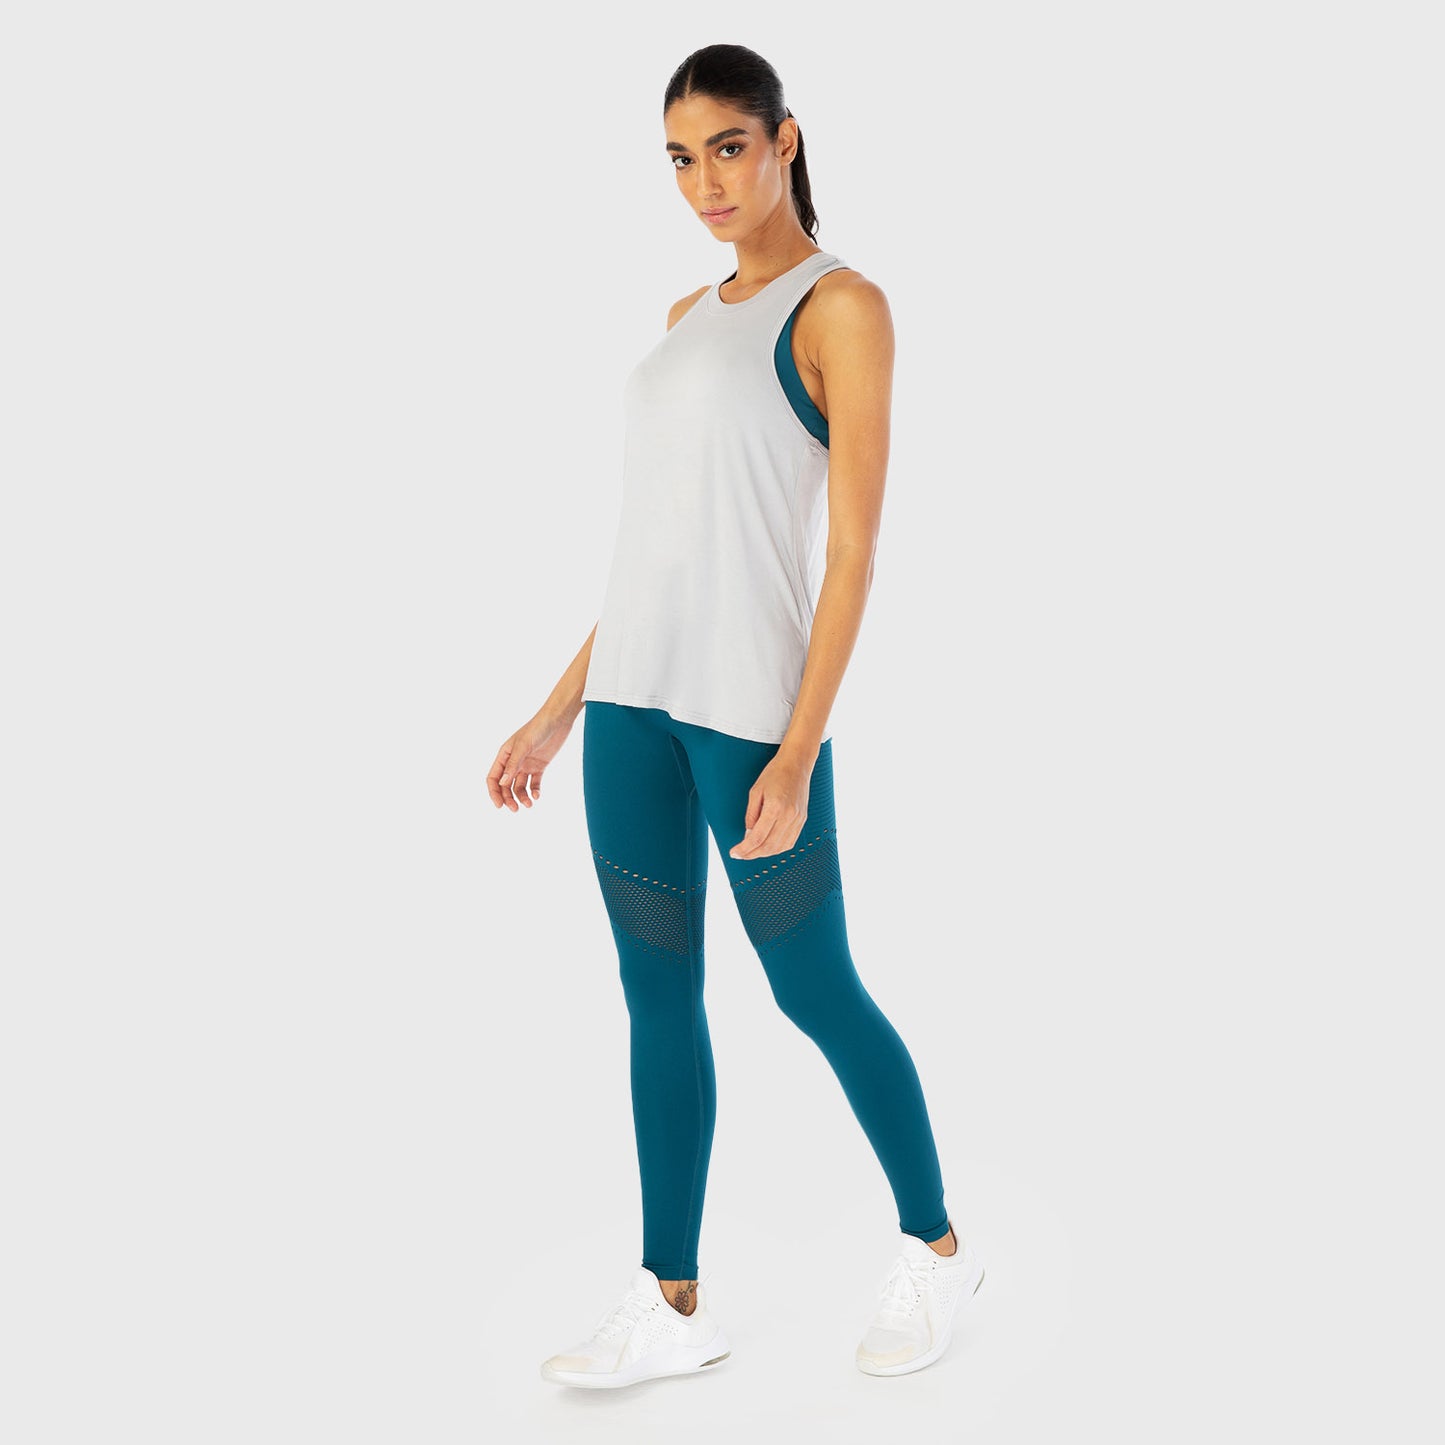 squatwolf-workout-clothes-infinity-longline-workout-tank-light-blue-fog-gym-tank-tops-for-women